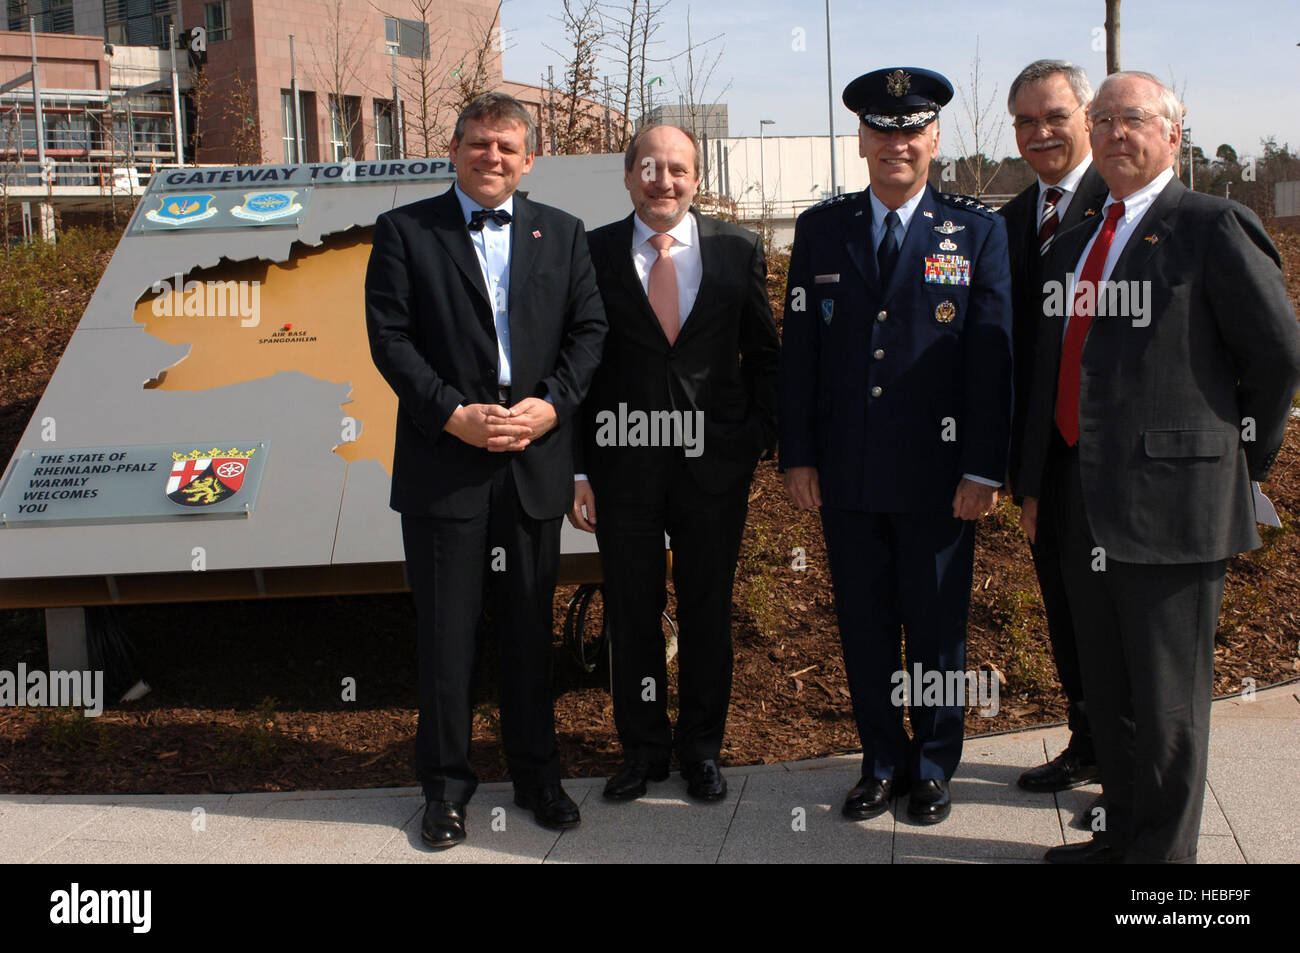 (Left to right) Mr. Volker Hoff, State of Hesse Minister for Federal and European Matters, Professor Dr. Ingolf Deubel, Minister of Finance, General Tom Hobbins, United States Air Forces in Europe commander, Mr. Karl Peter Bruch, Deputy Minister President, and Ambassador William Timken, United States Ambassador to Germany; stand by the newly dedicated monument that dubs Ramstein Air Base as the new gateway to Europe, which was previously held by Rhein-Main Air Base.(U.S. Air Force photo by Airman 1st Class Julianne Showalter)(RELEASED) Stock Photo